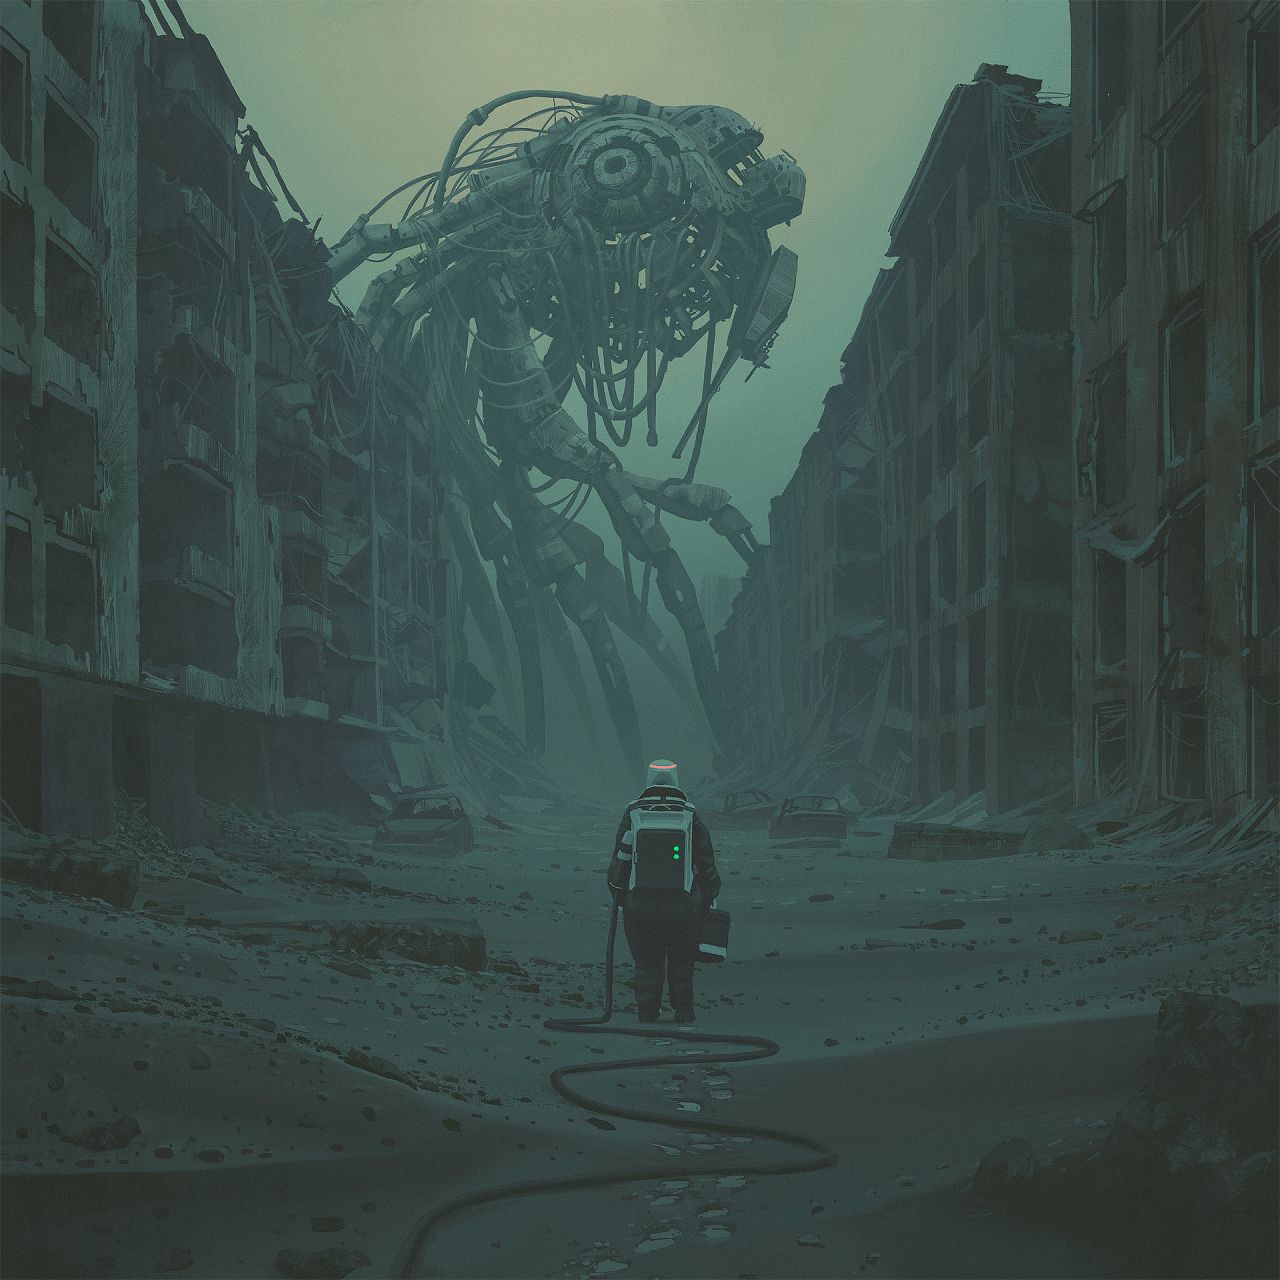 An image from Stålenhag's forthcoming book, "The Labyrinth."